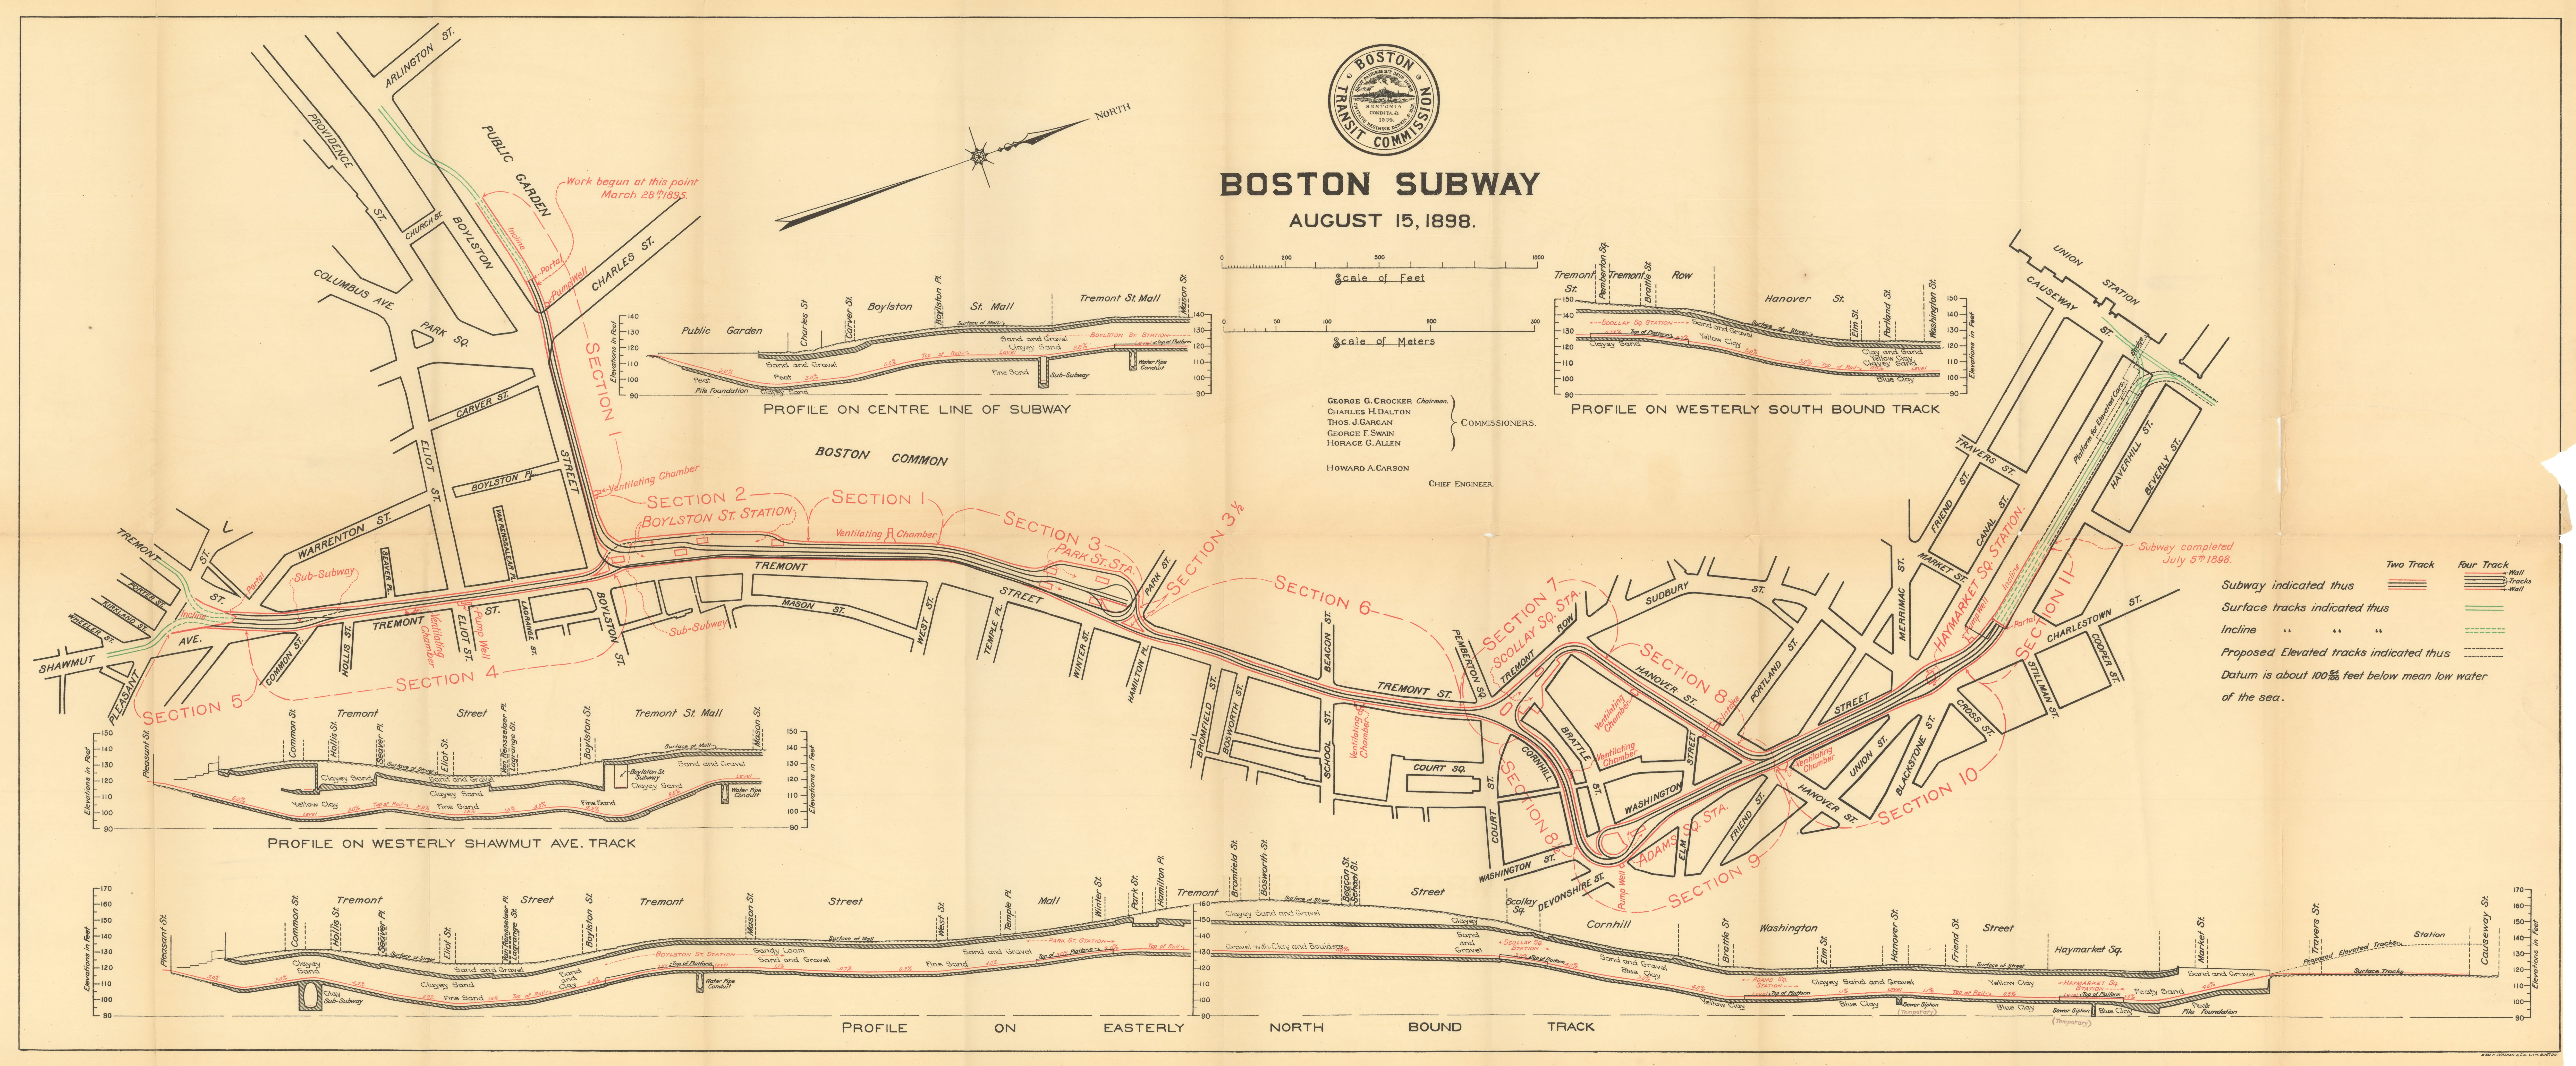 Image of “Boston Subway, August 15, 1898“ from “Fourth Annual Report of the Boston Transit Commission”